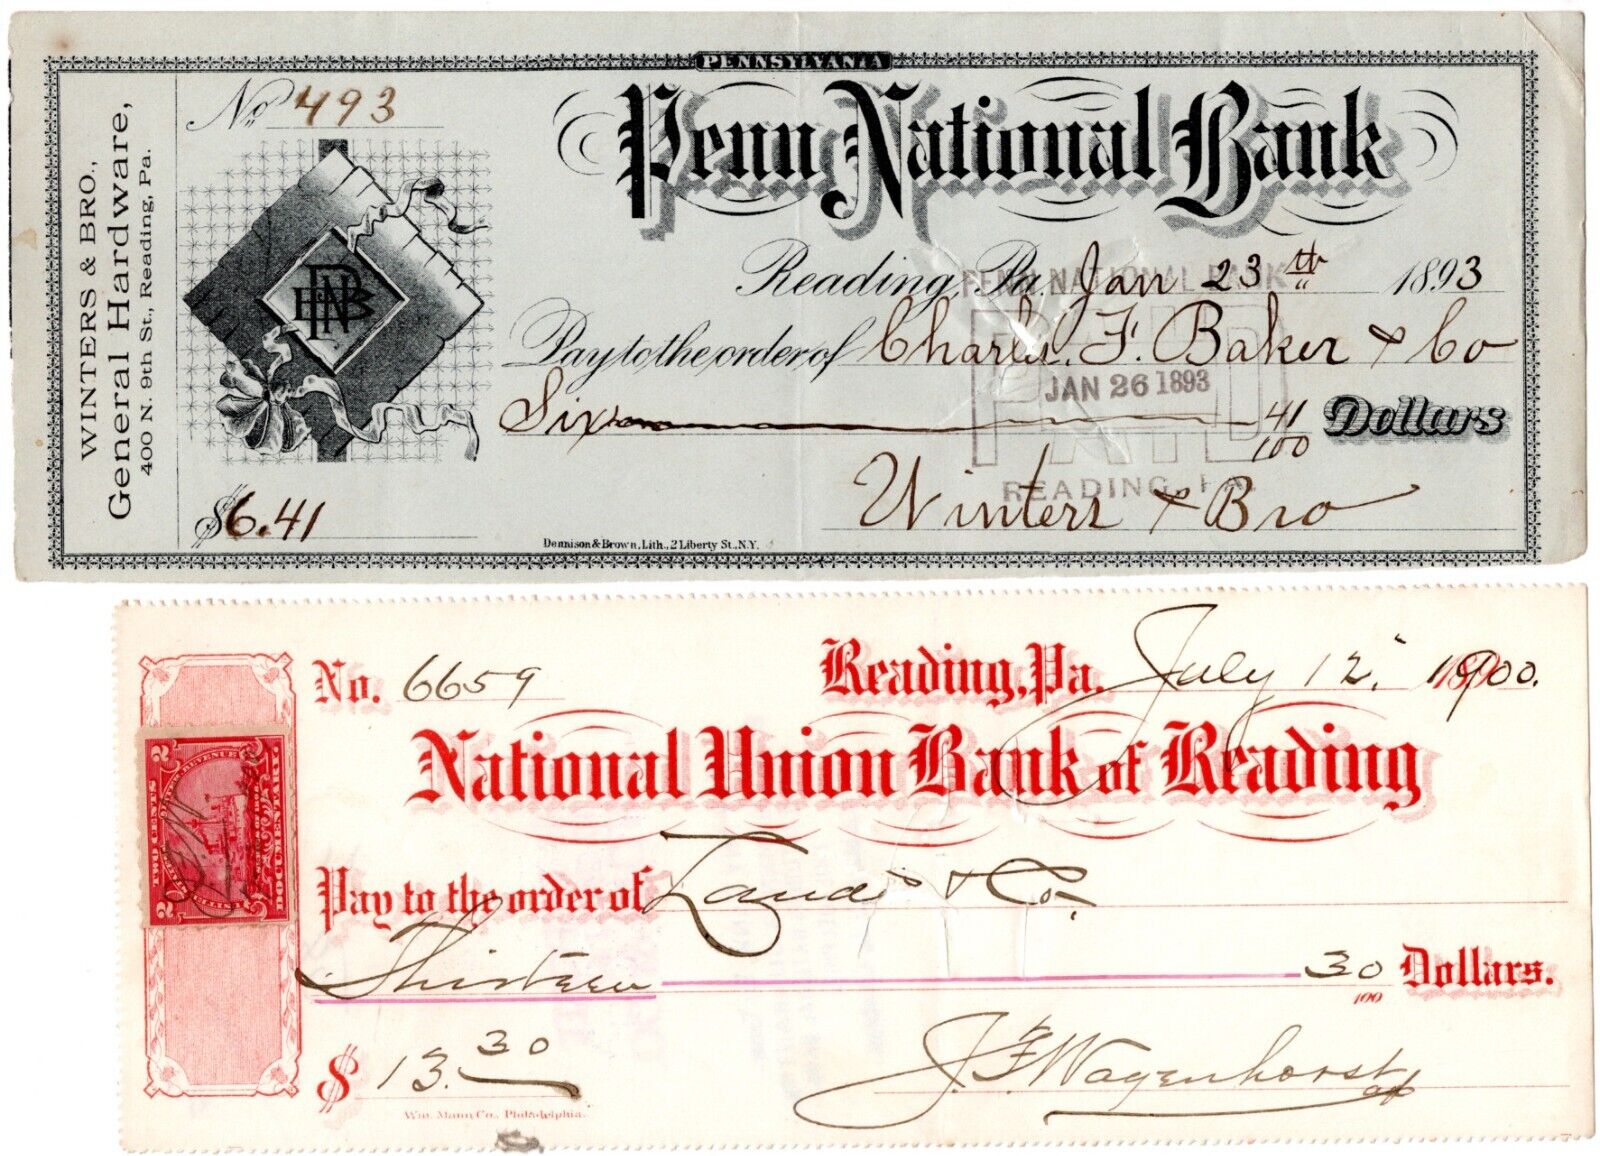 Penn National, National Union Bank of Reading, Pa. cancelled checks 1893, 1900